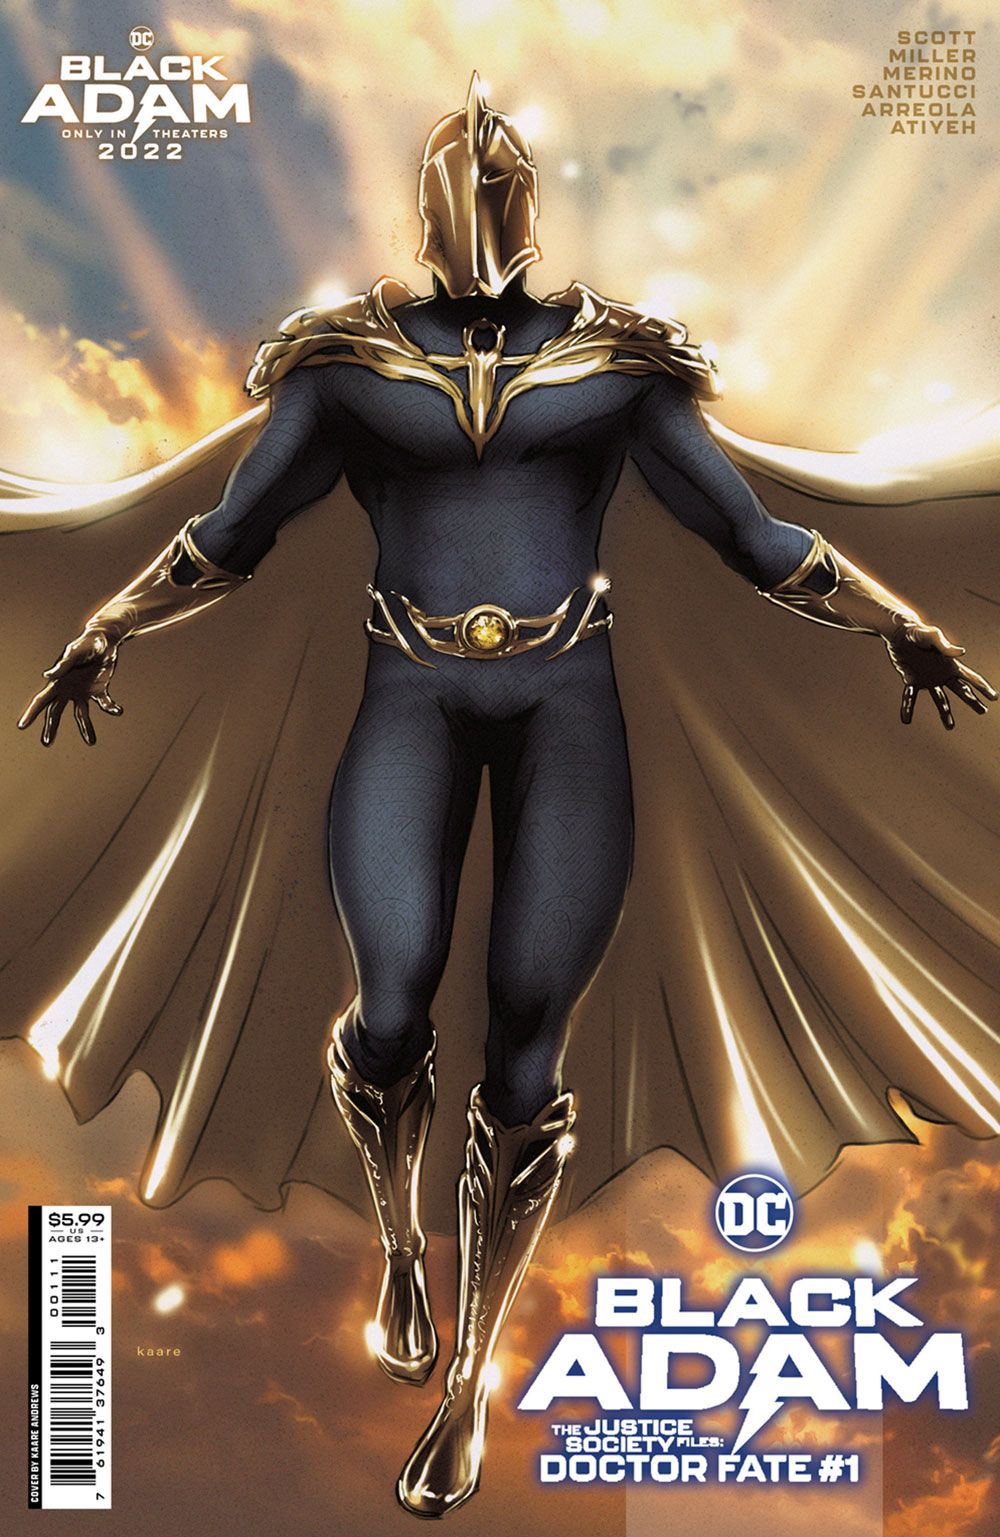 Black-Adam---The-Justice-Society-Files-Doctor-Fate-1